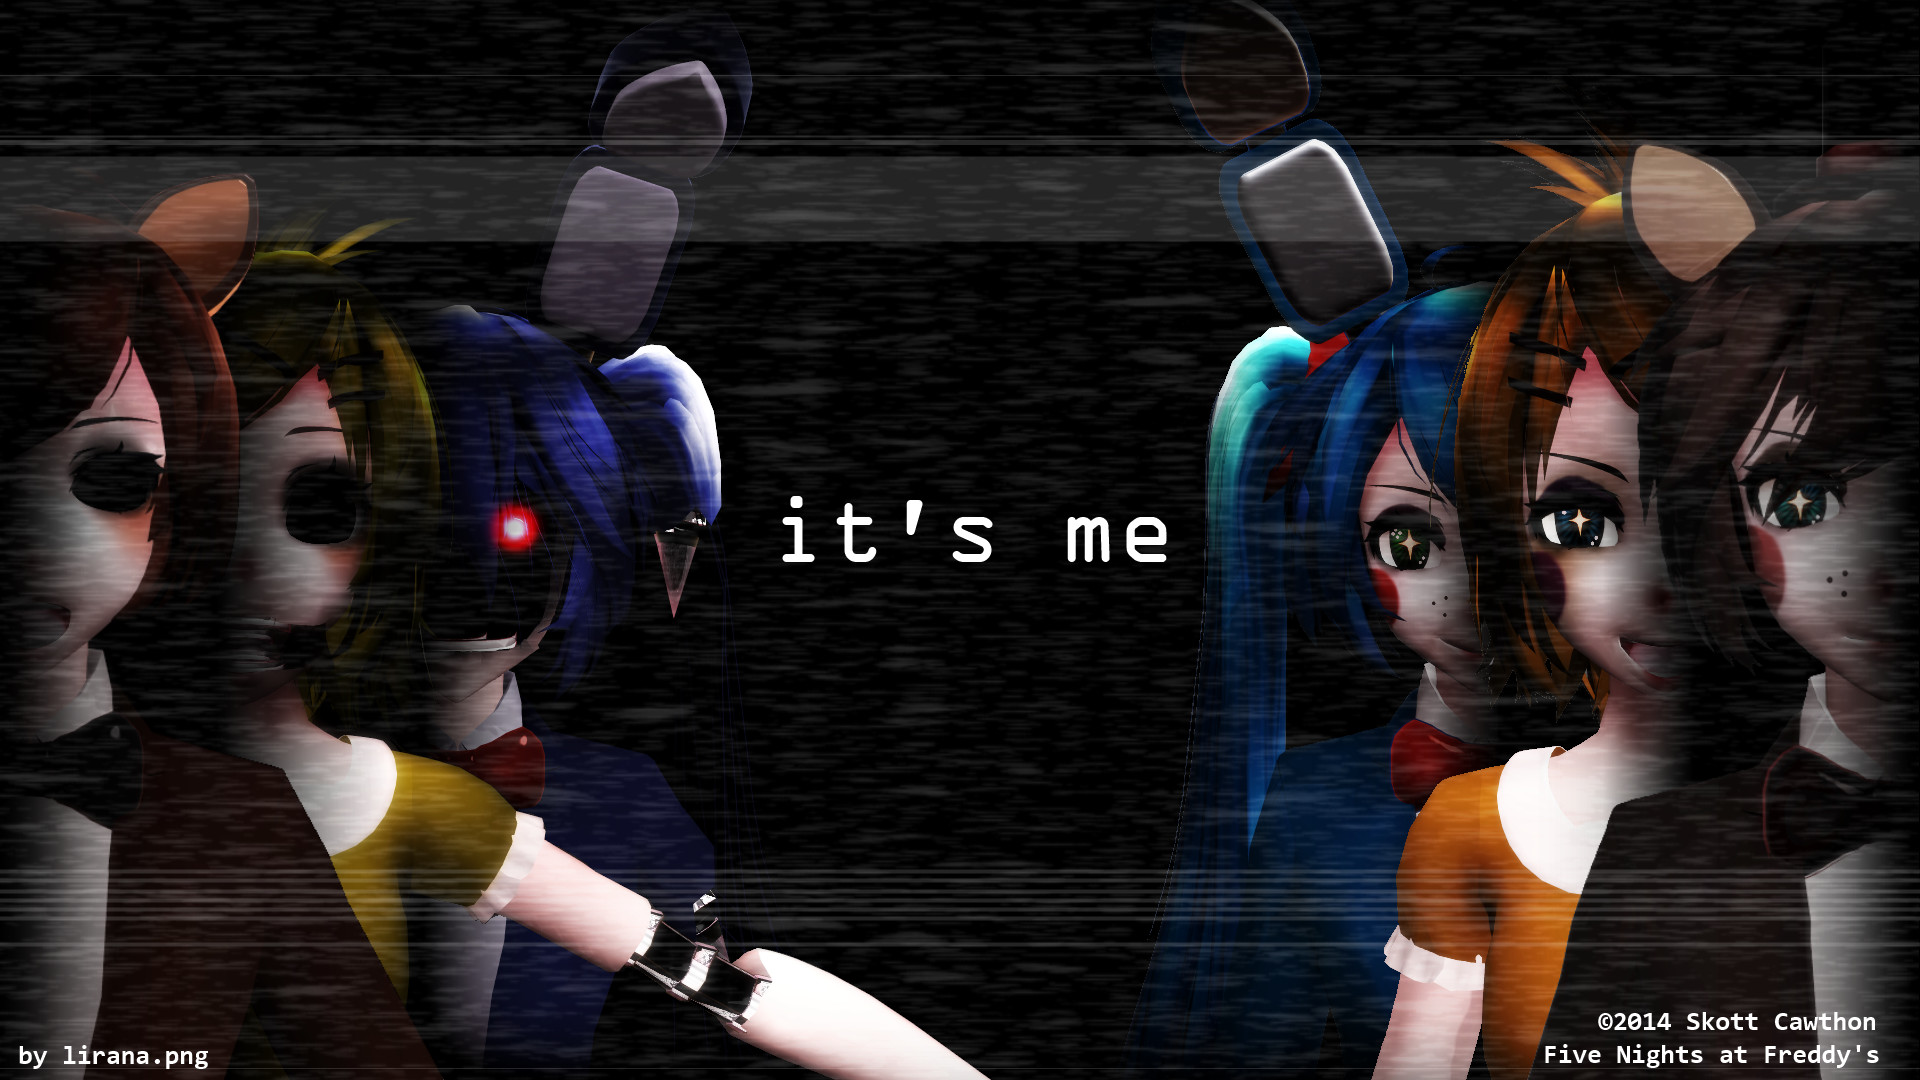 1920x1080 ... MMD Five Night at Freddy's vocaloid edit wallpaper by liranaPNG